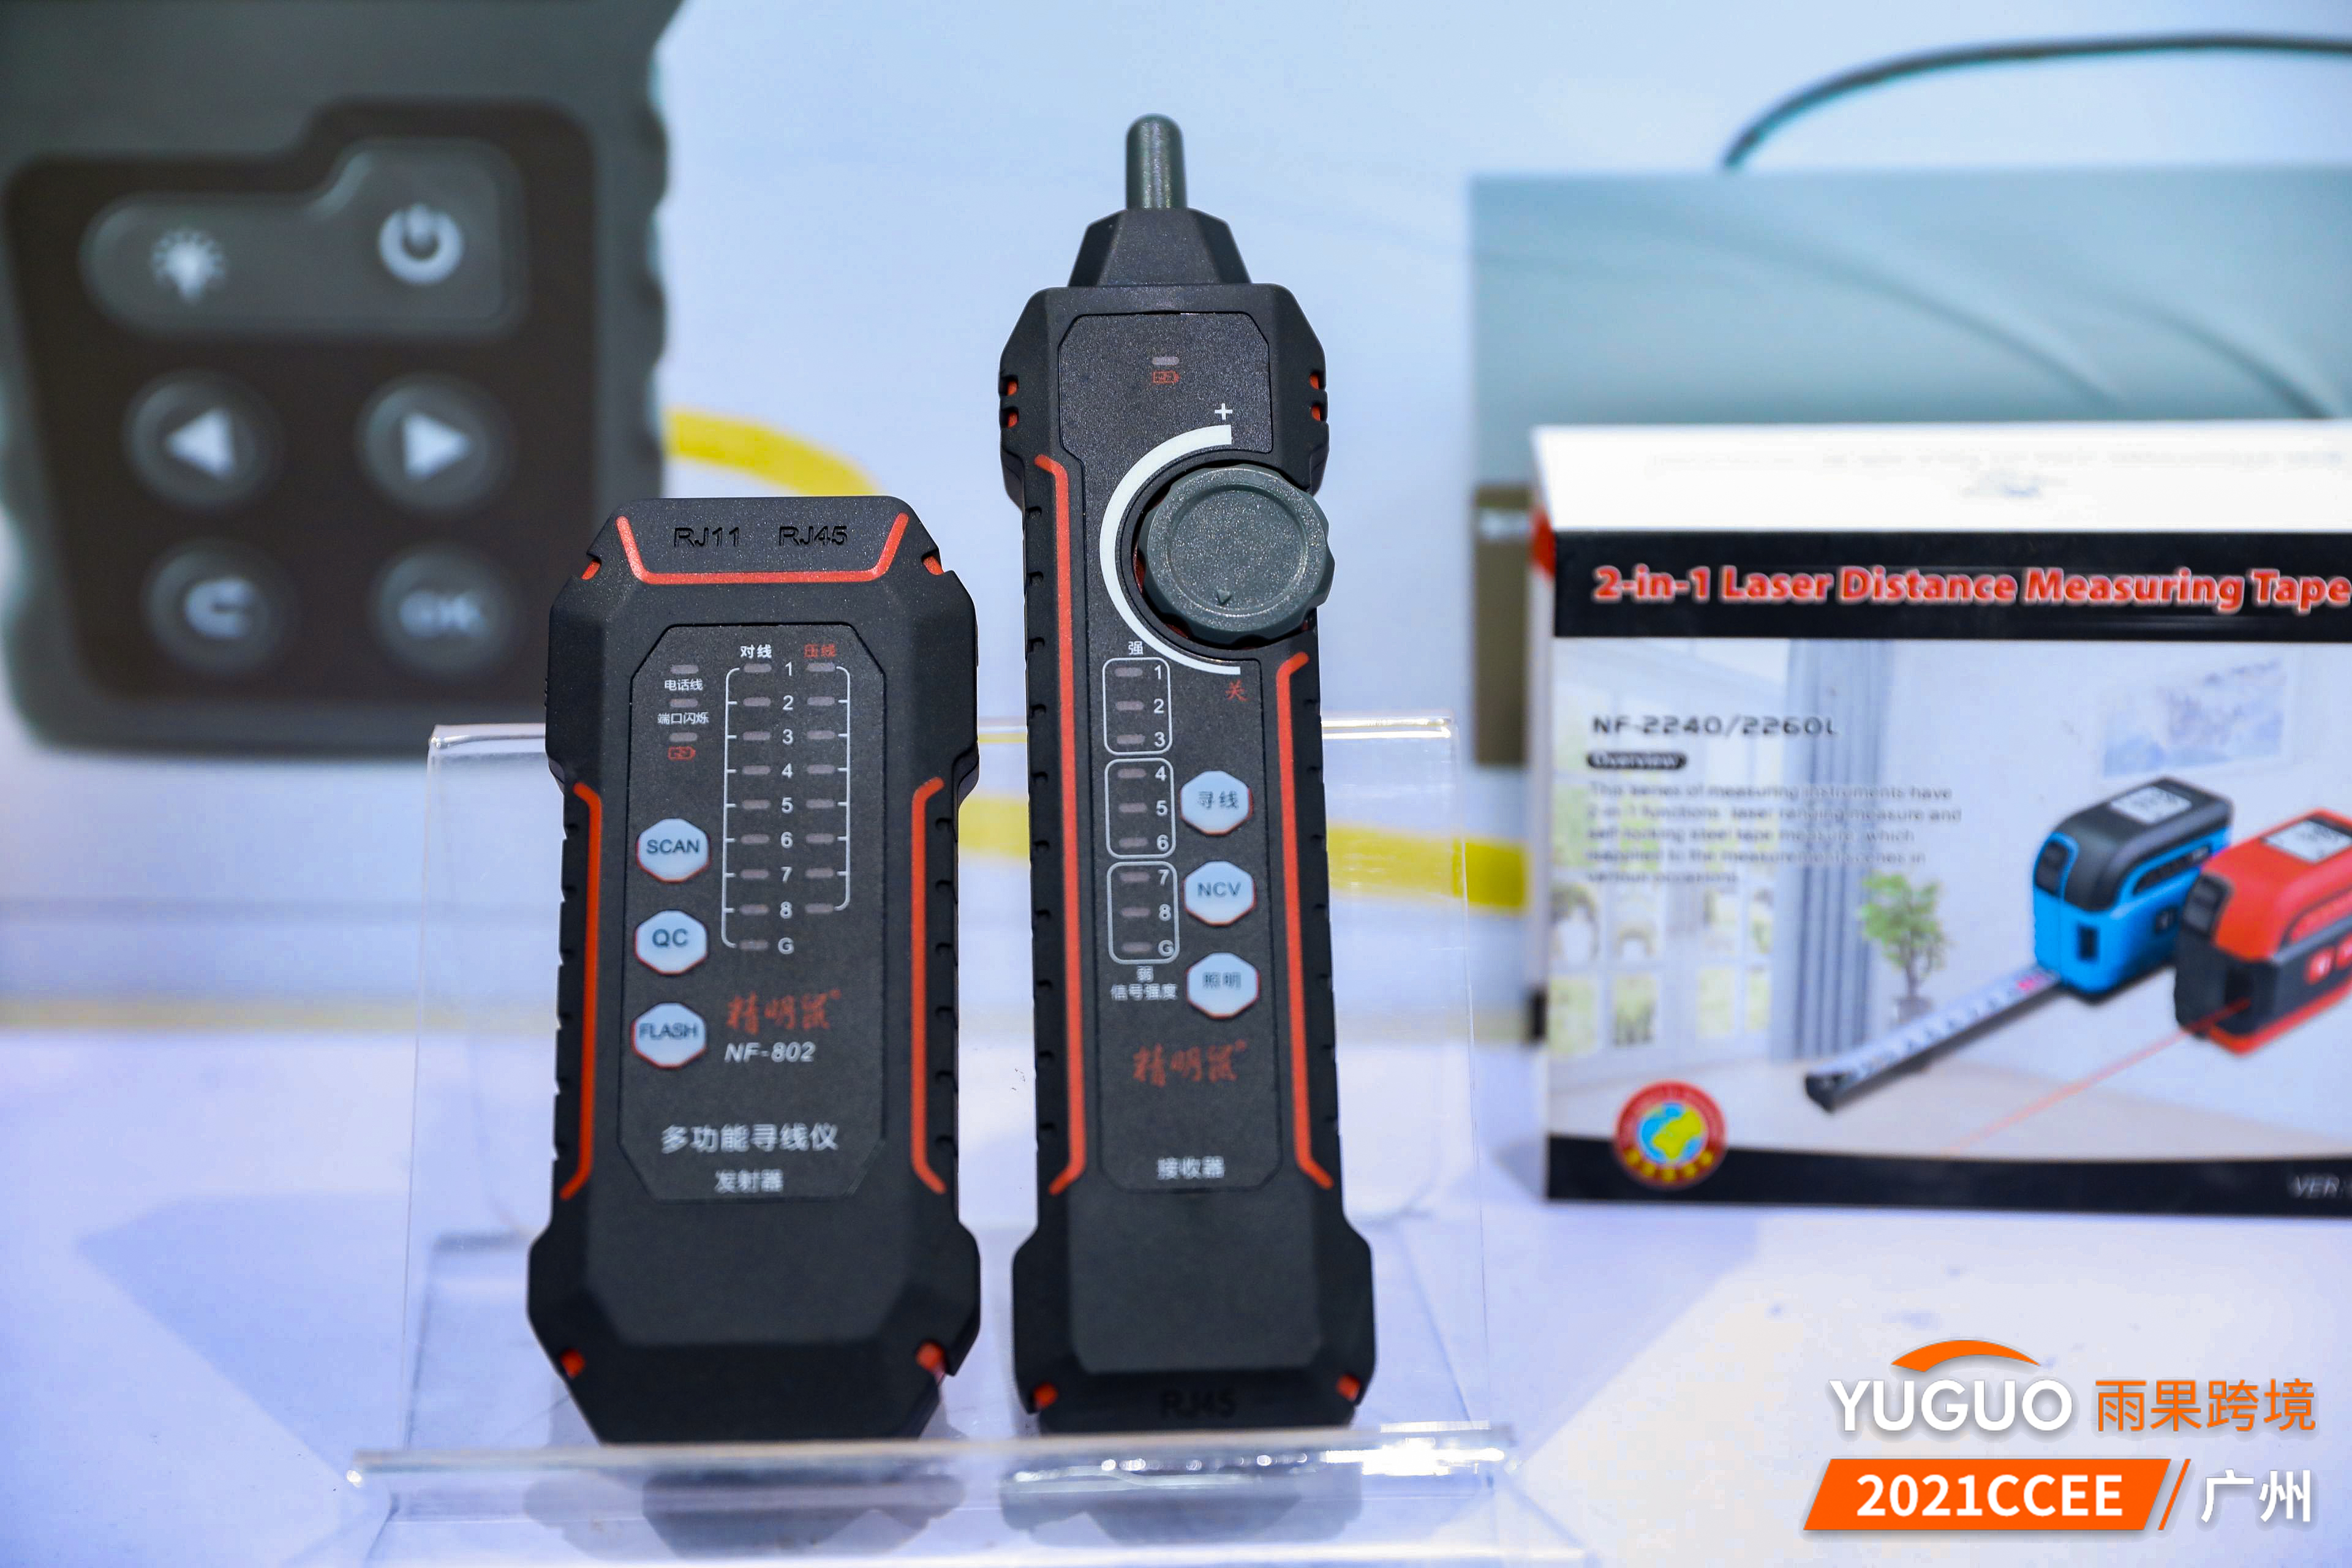 The 5 Best Reasons Why You Should Use a Laser Light Power Meter 1